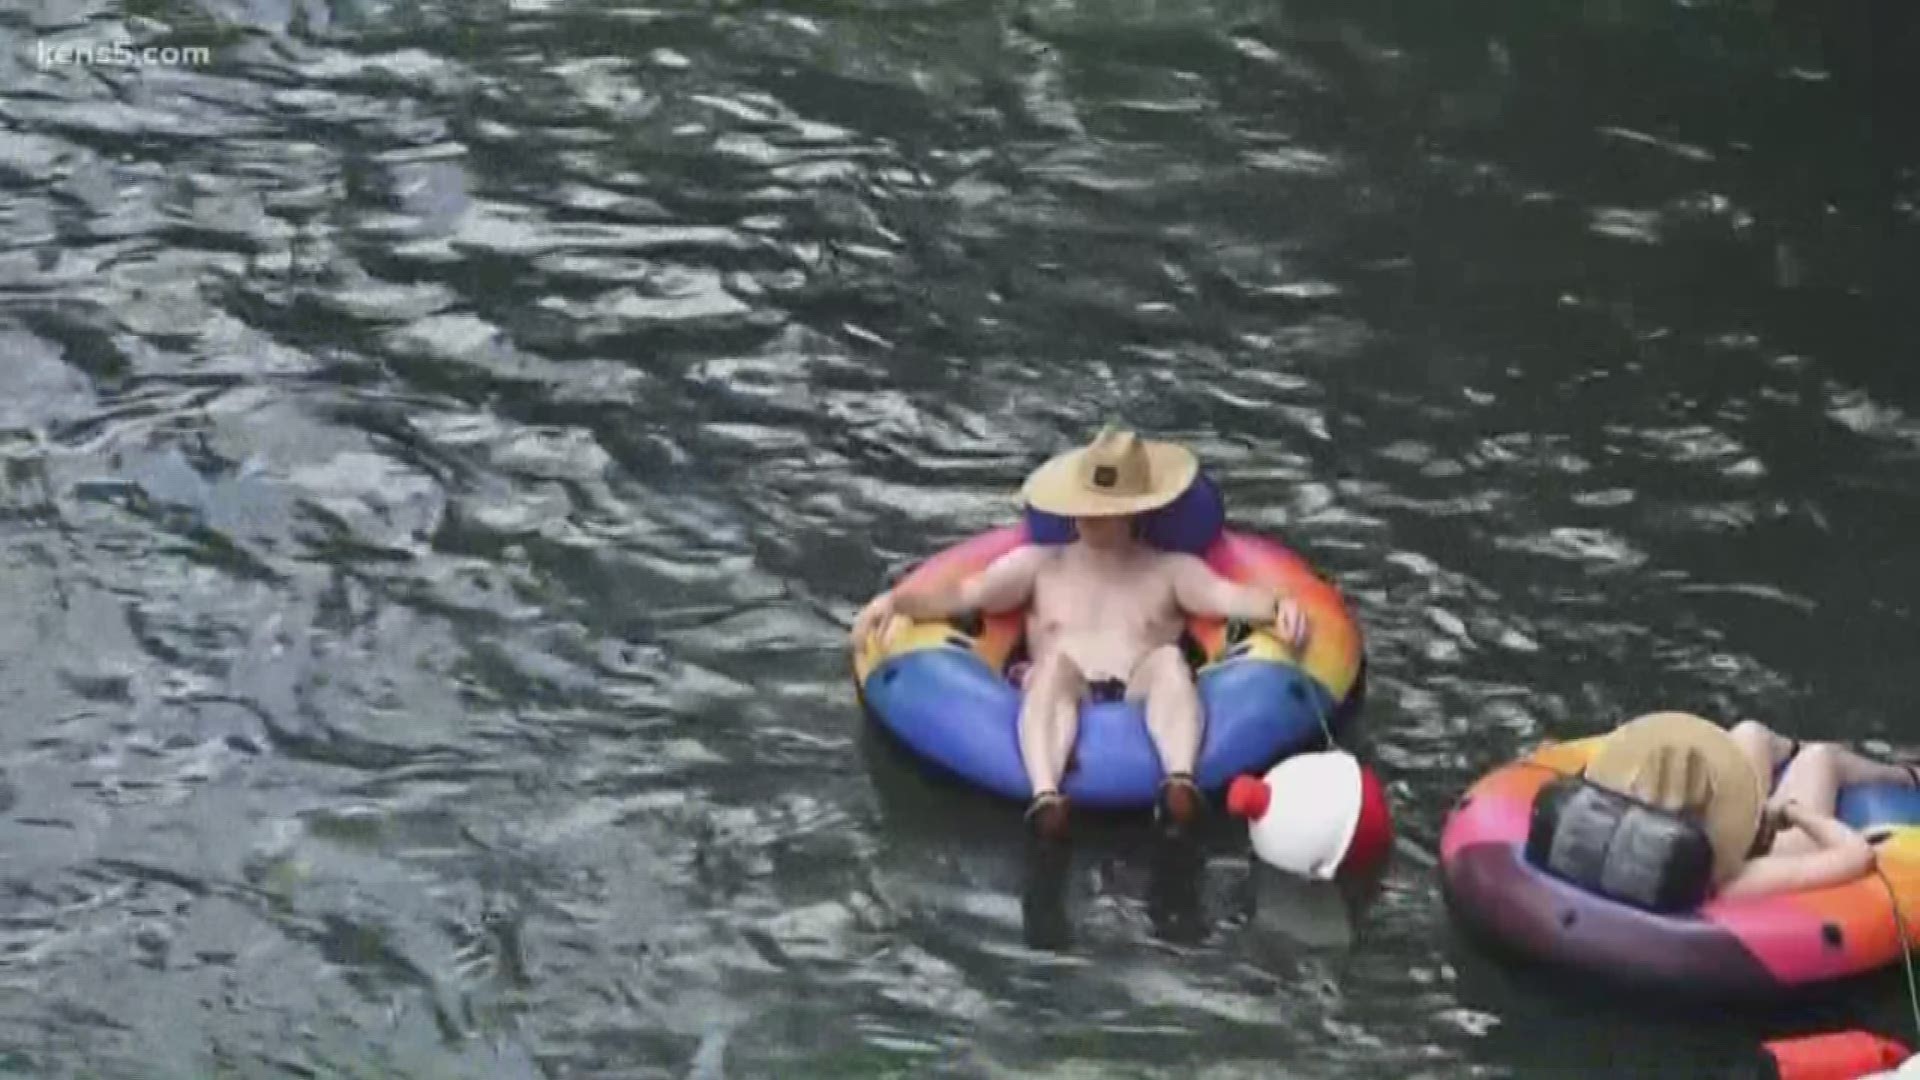 South Texans took out their tubes and took to the water to beat the heat over an extended July 4 holiday weekend.